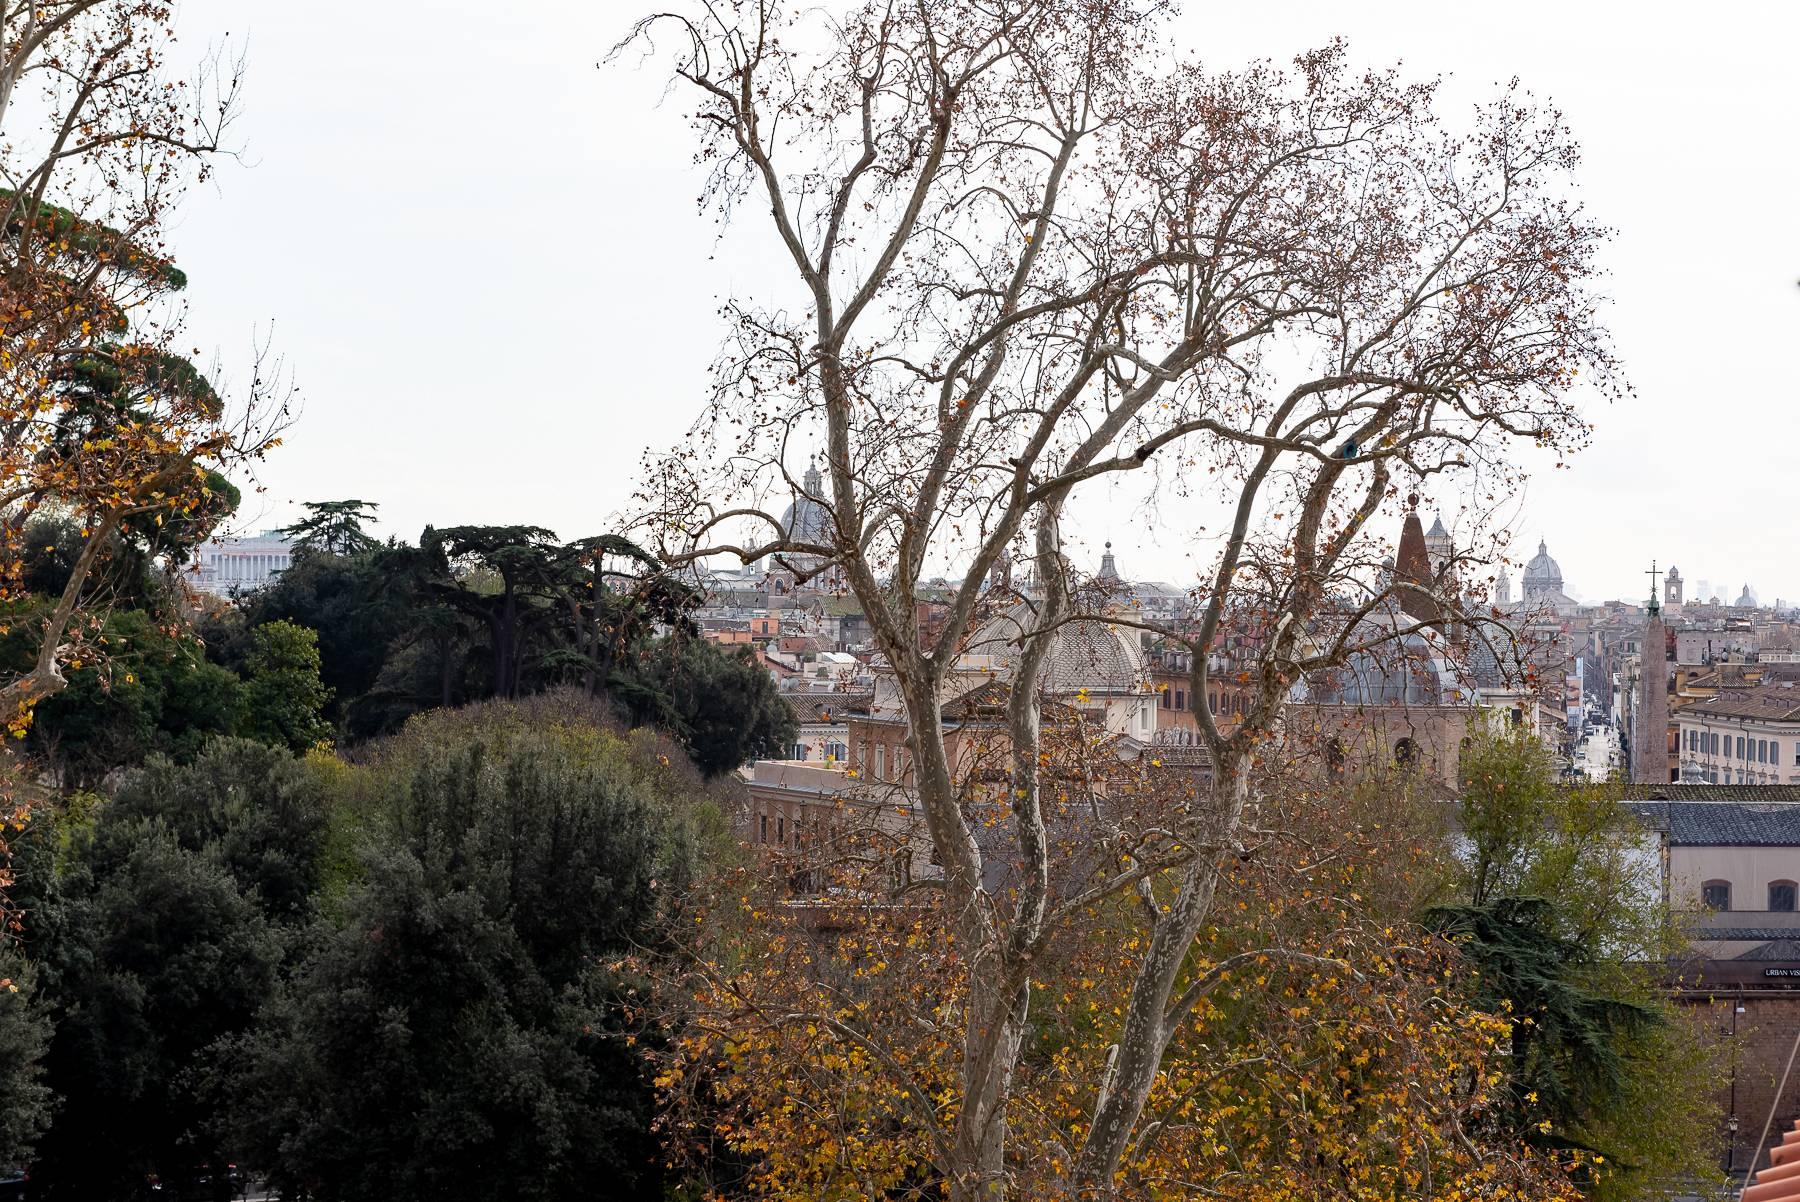 Penthouse with terraces overlooking Villa Borghese - 2